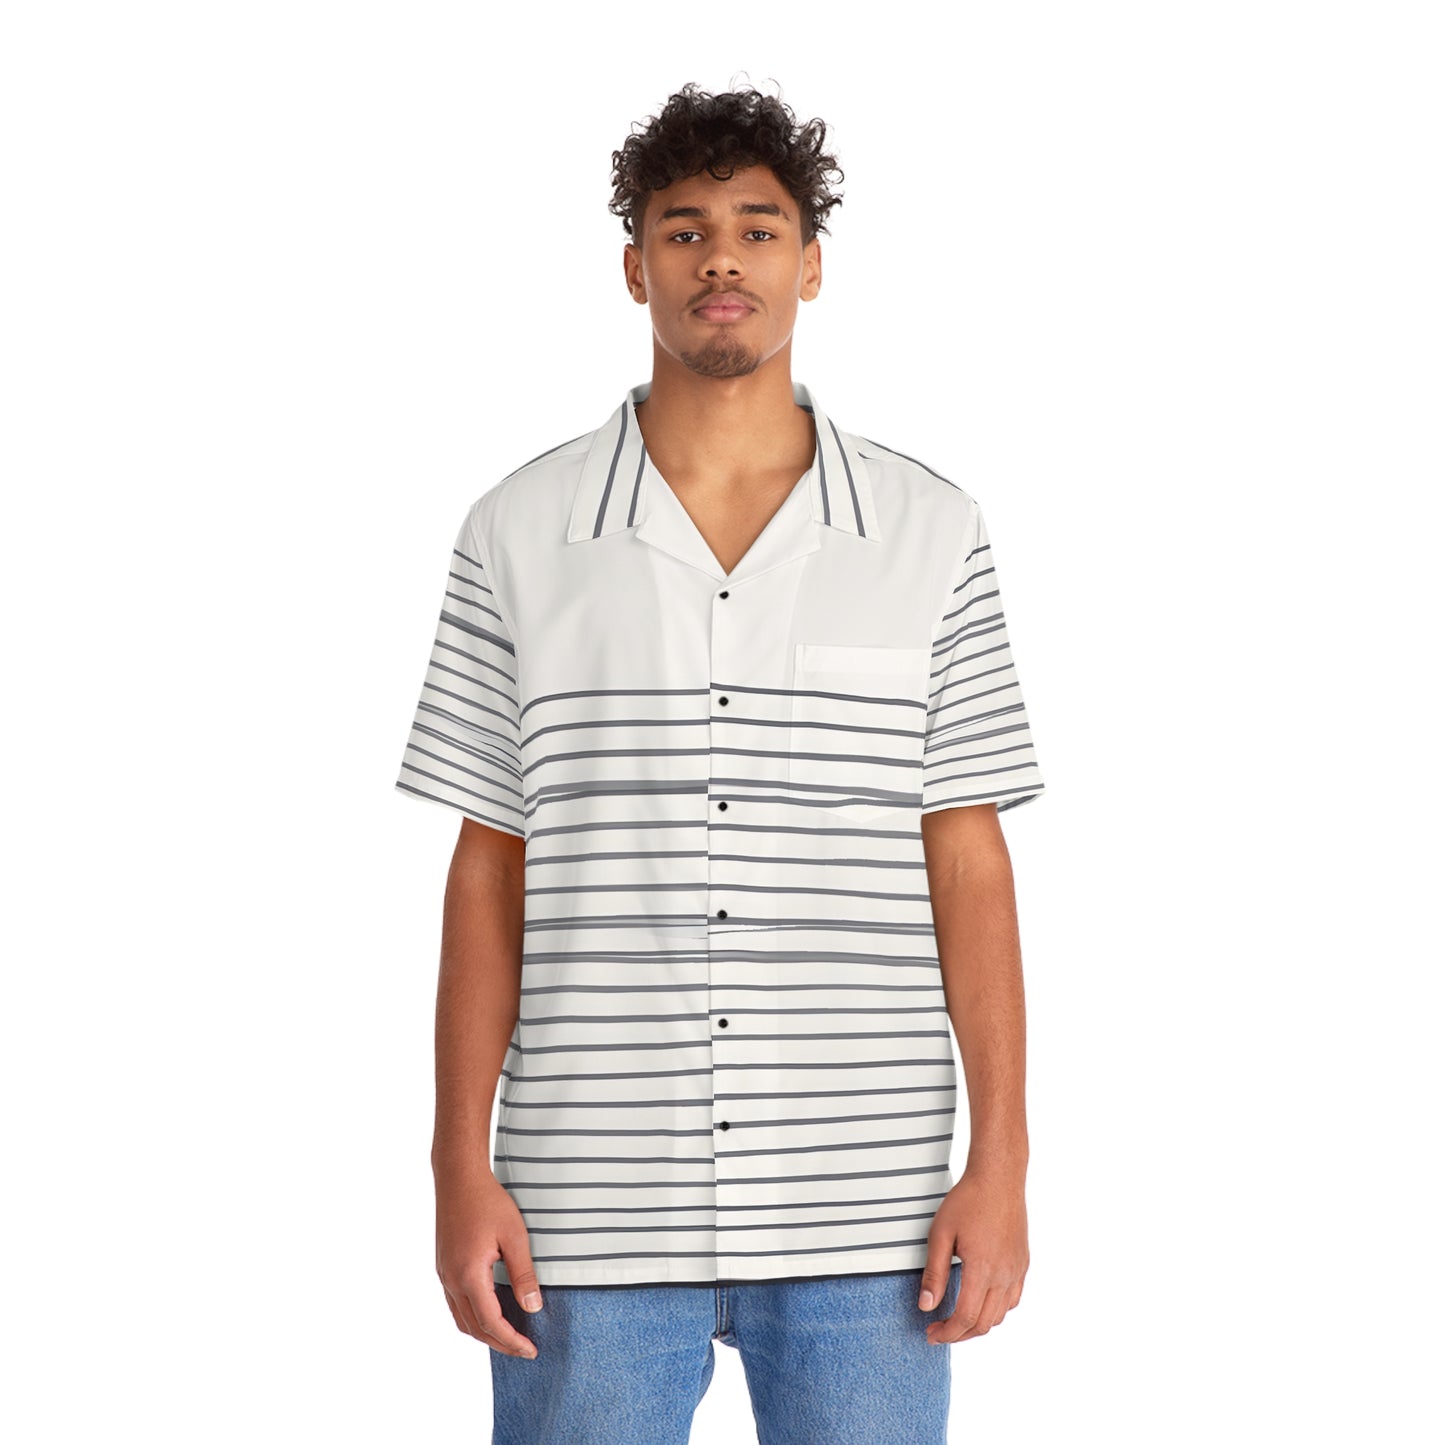 Lino Winifred - Men's Button-Down Short-Sleeve